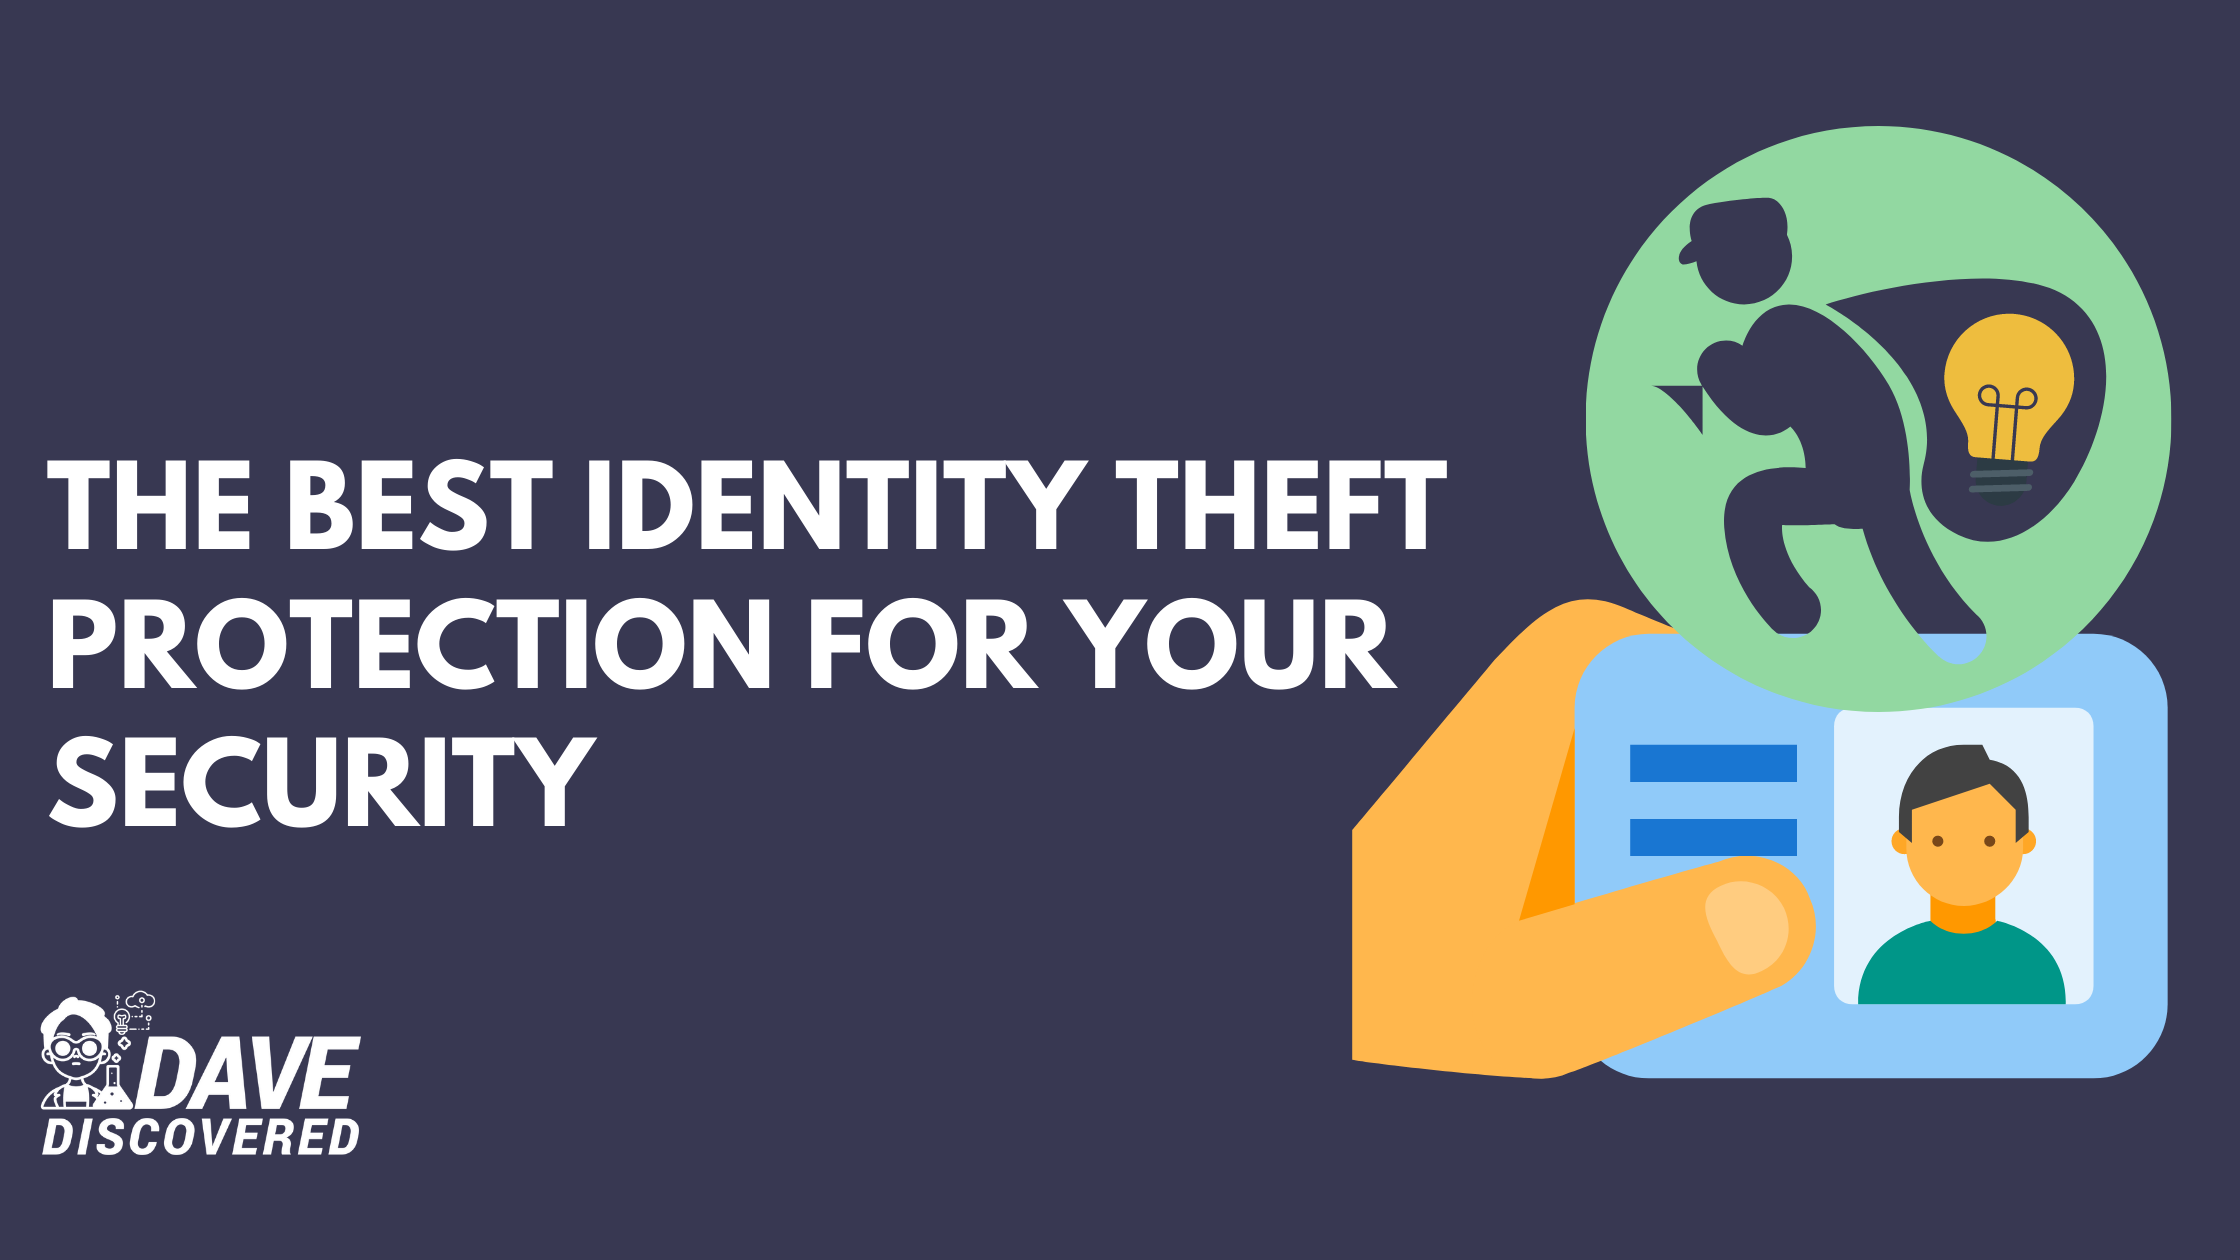 identity theft protection